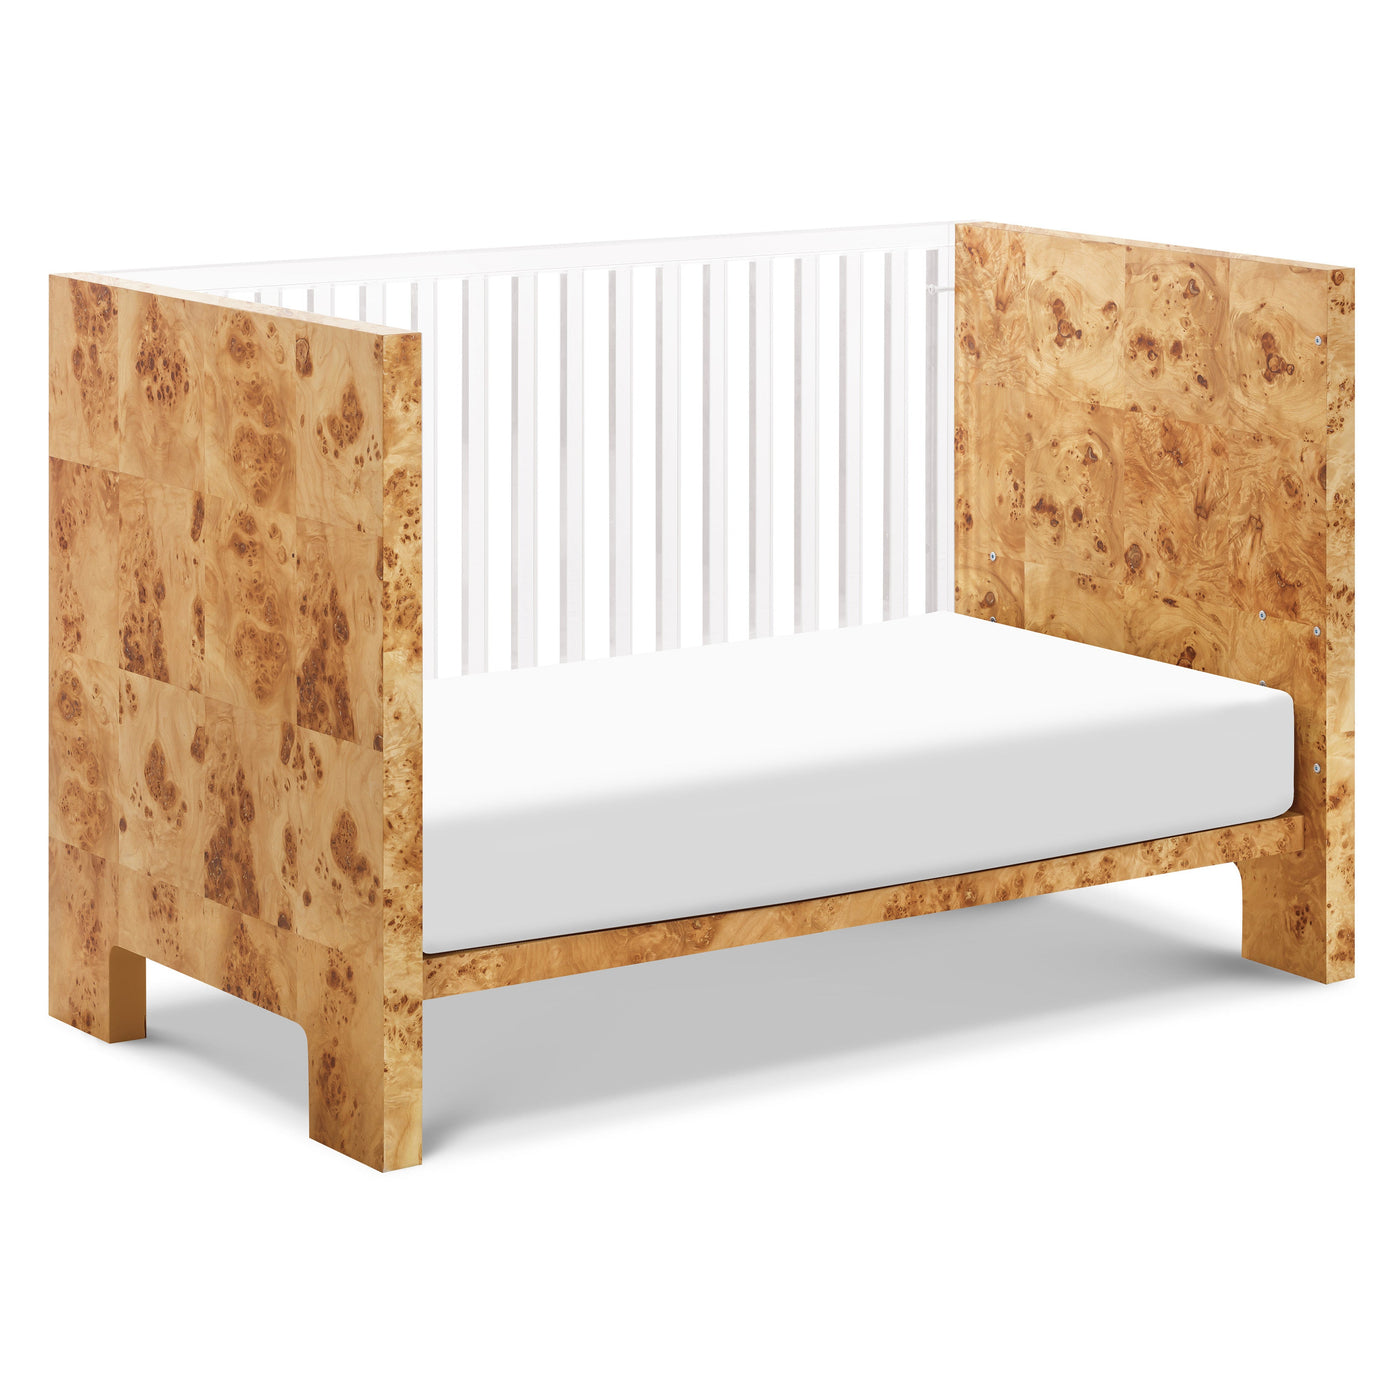 Babyletto Altair Crib Acrylic with Burl Wood